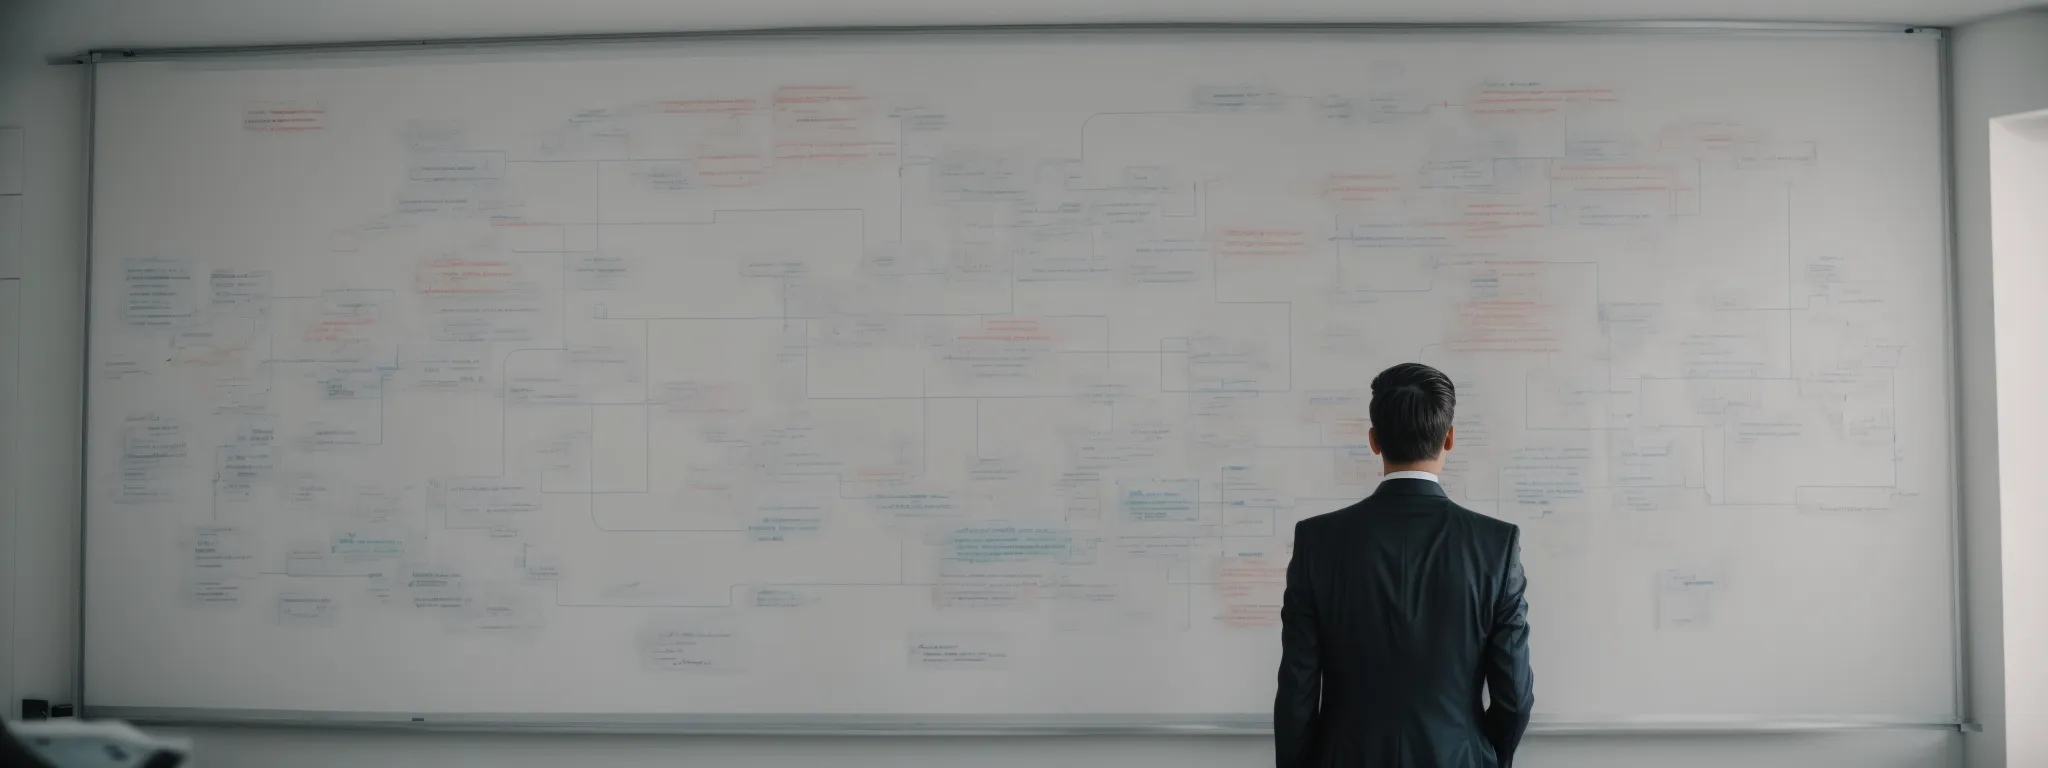 a businessperson stands before a large, vivid seo flowchart on a whiteboard, contemplating strategies.